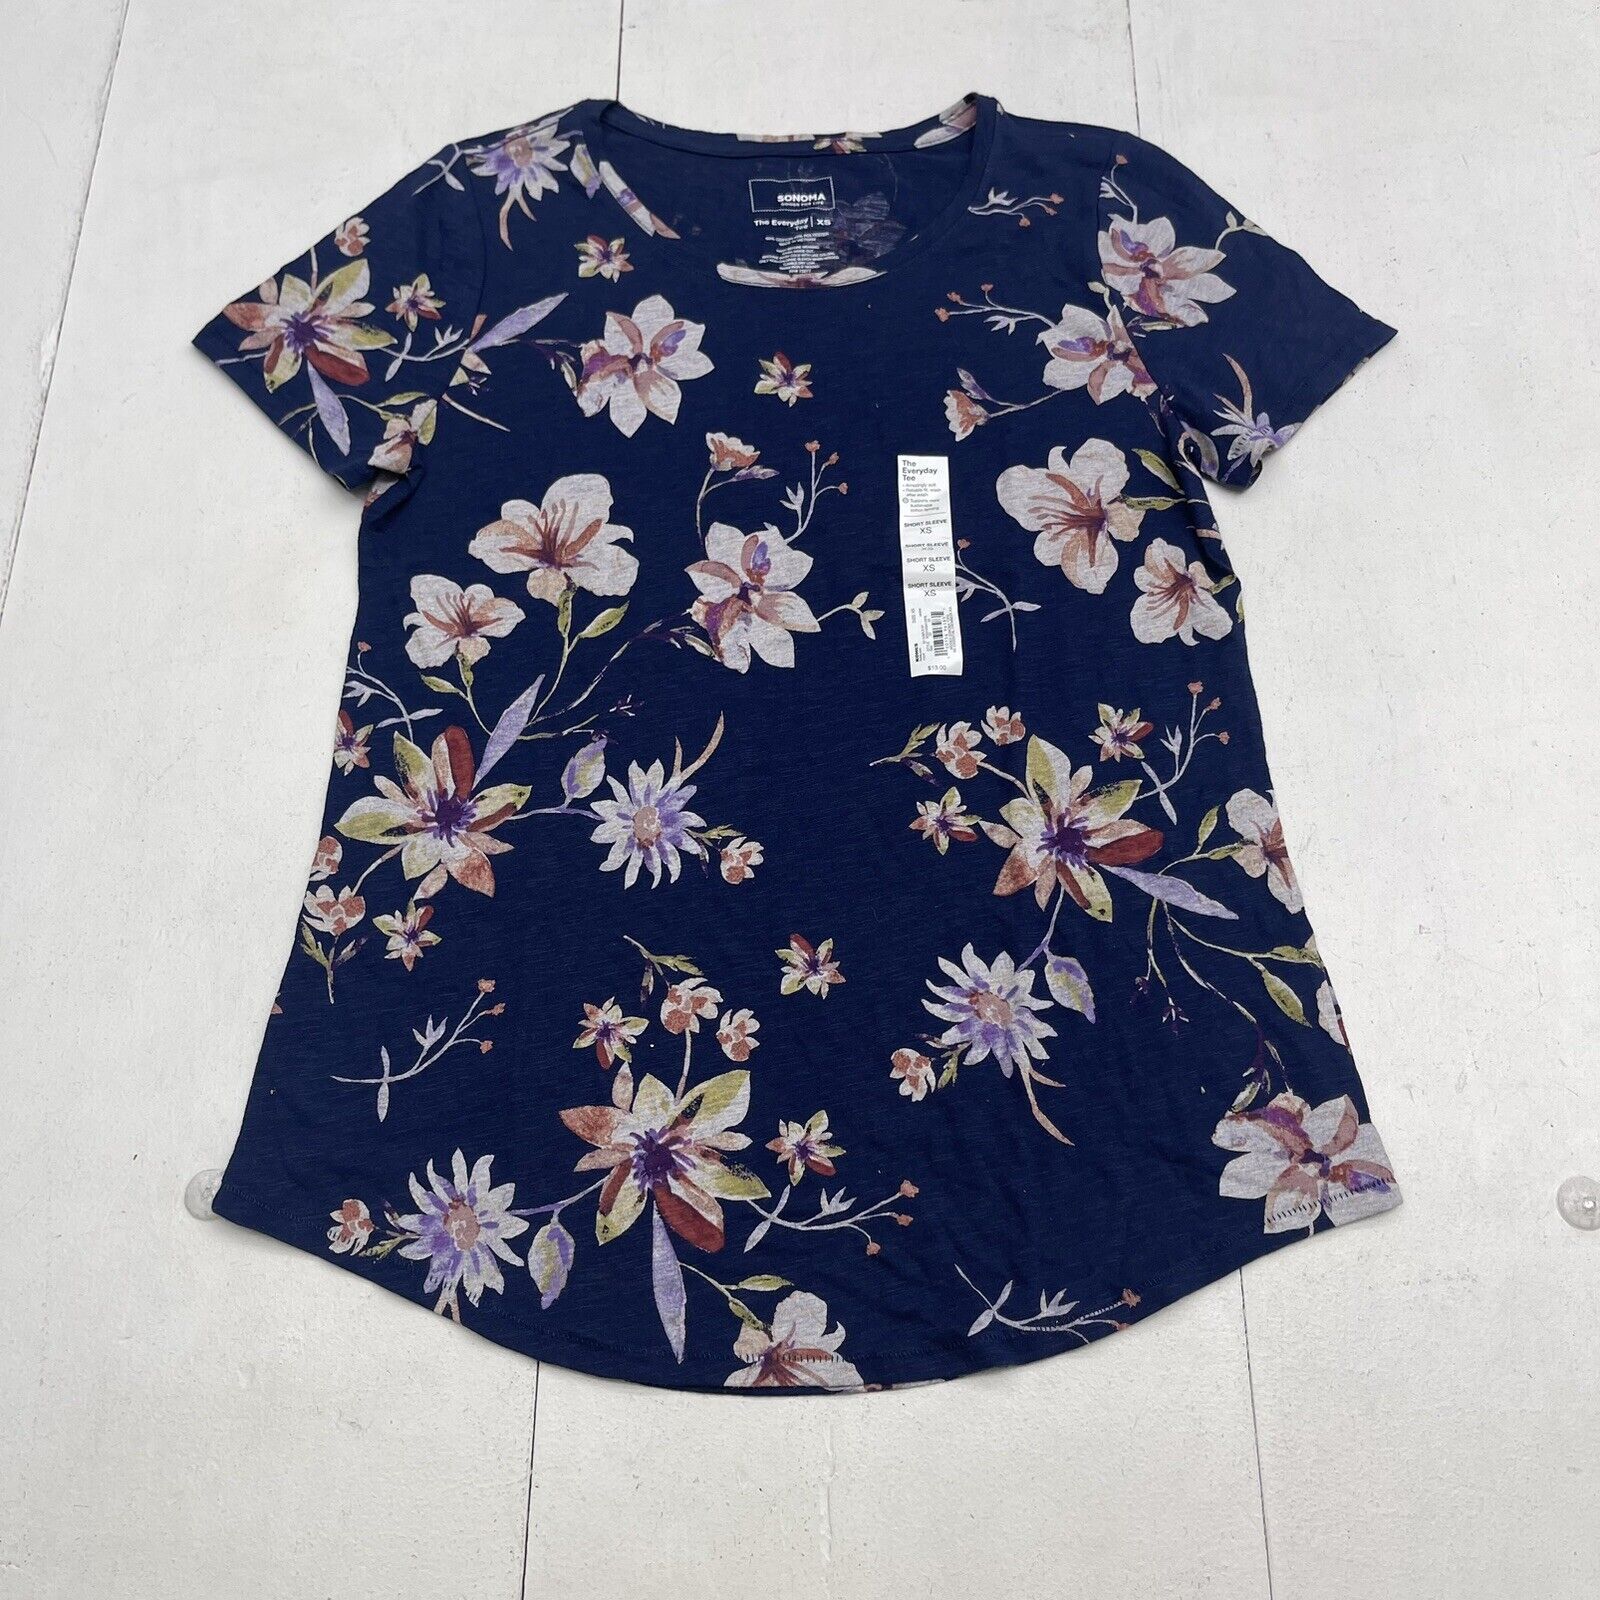 Sonoma Navy Blue Floral Everyday Short Sleeve Tee Women’s XS New